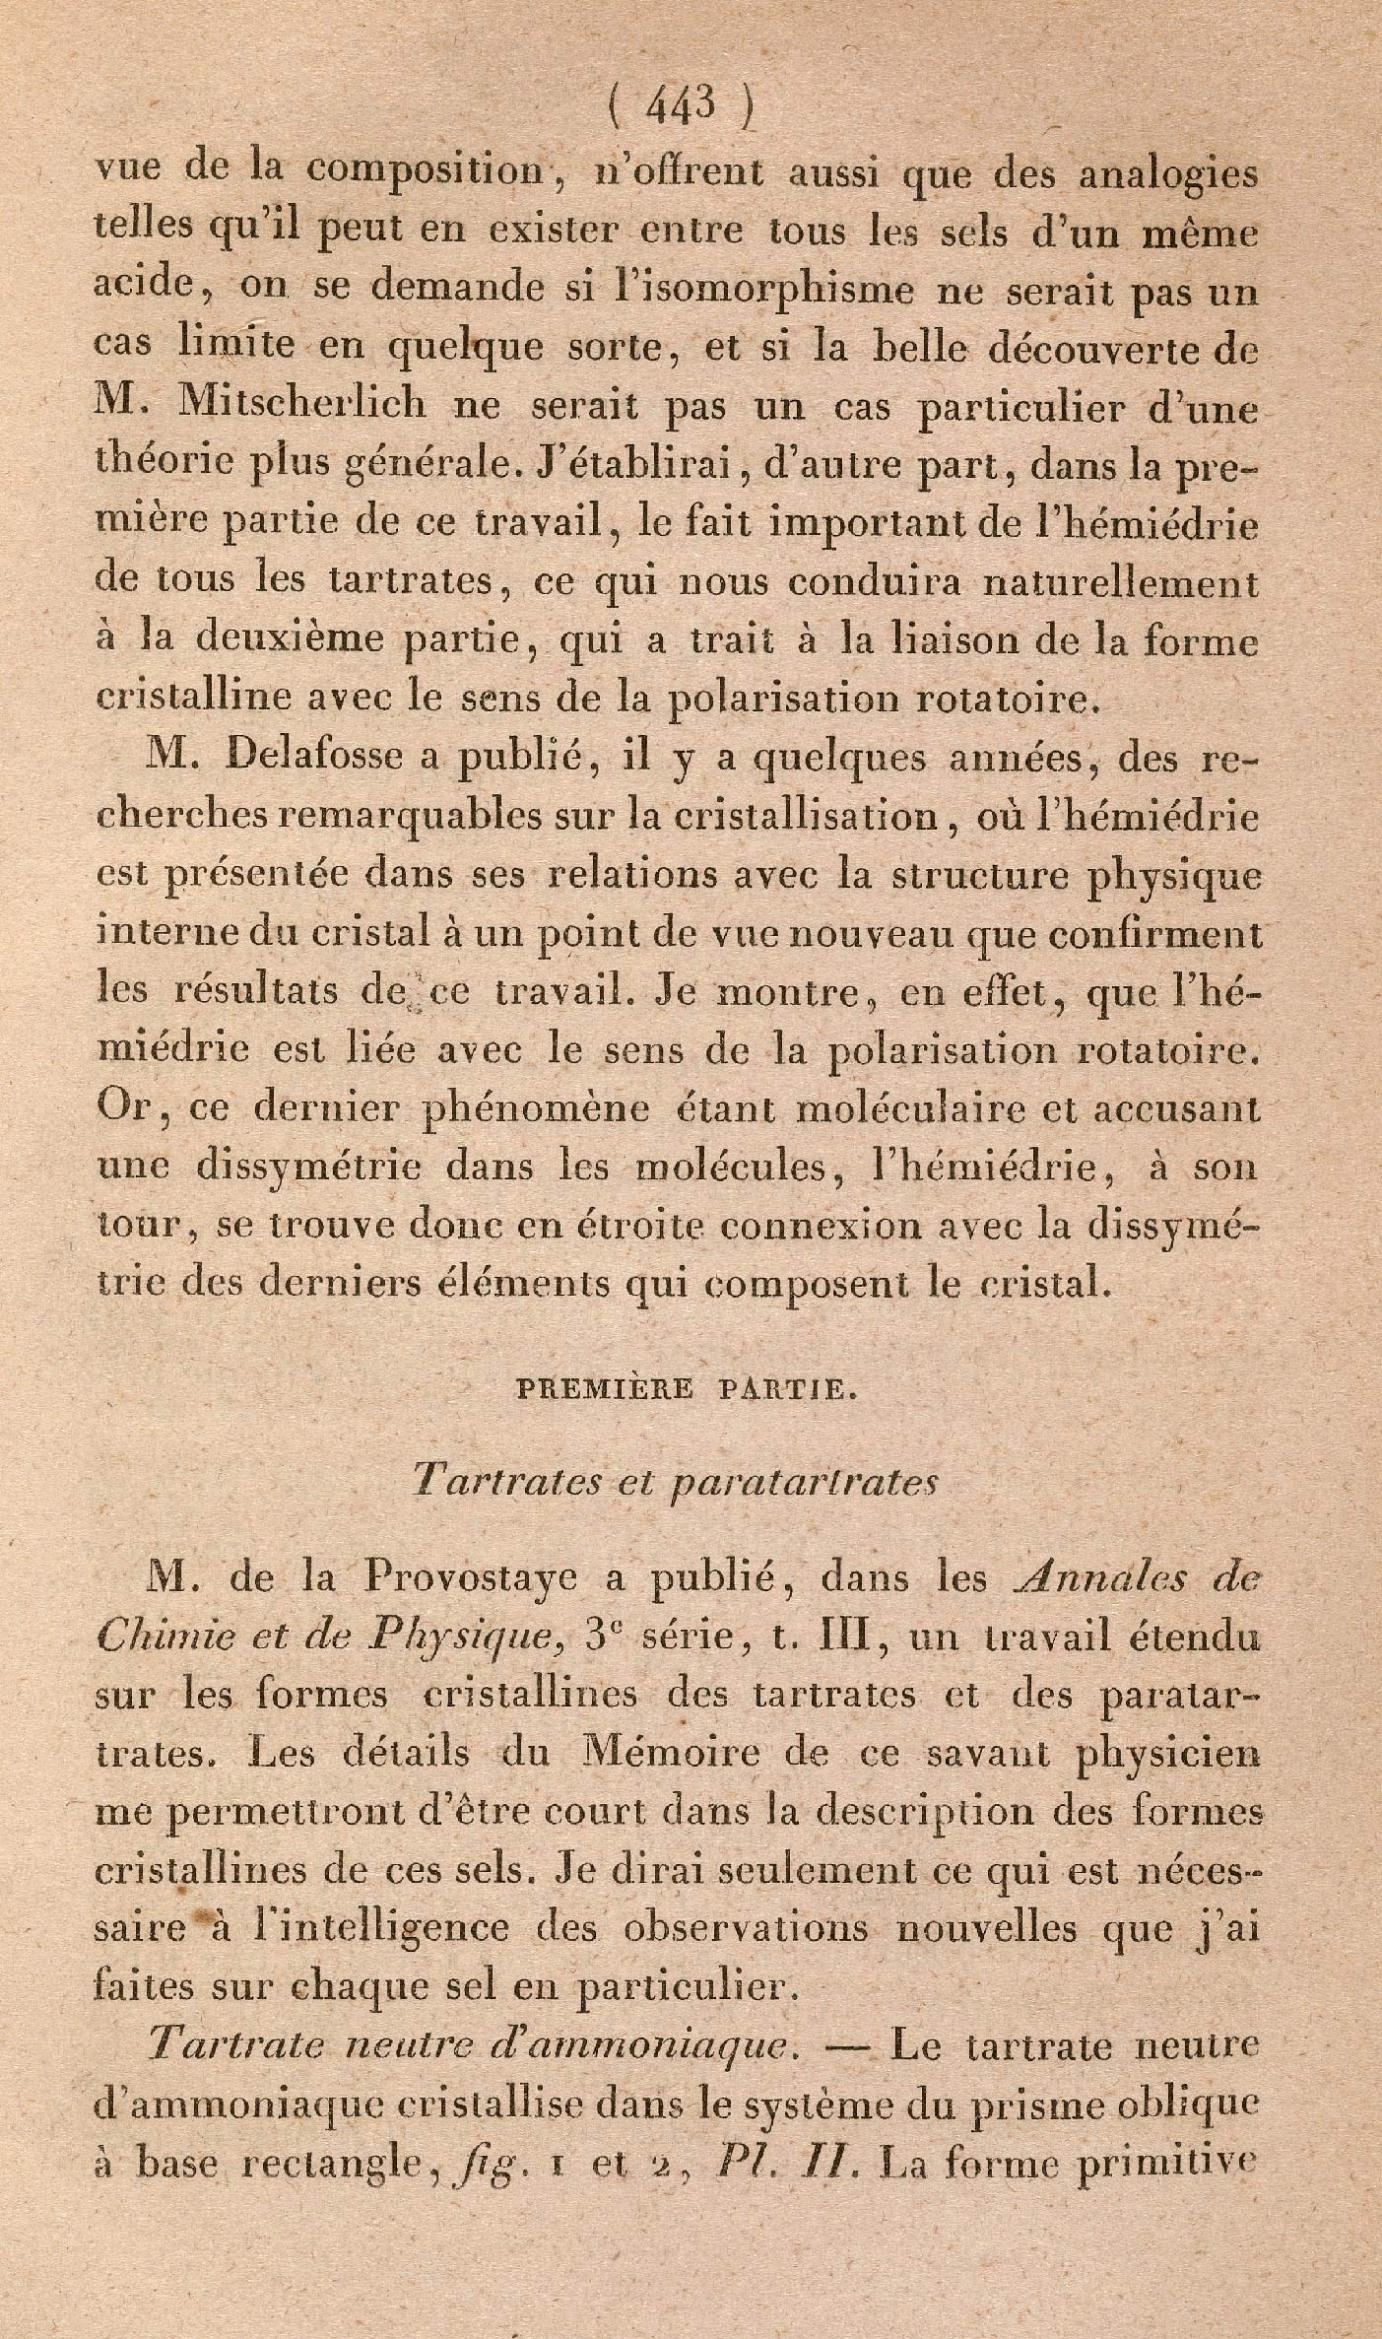 Page 443 of Pasteur article